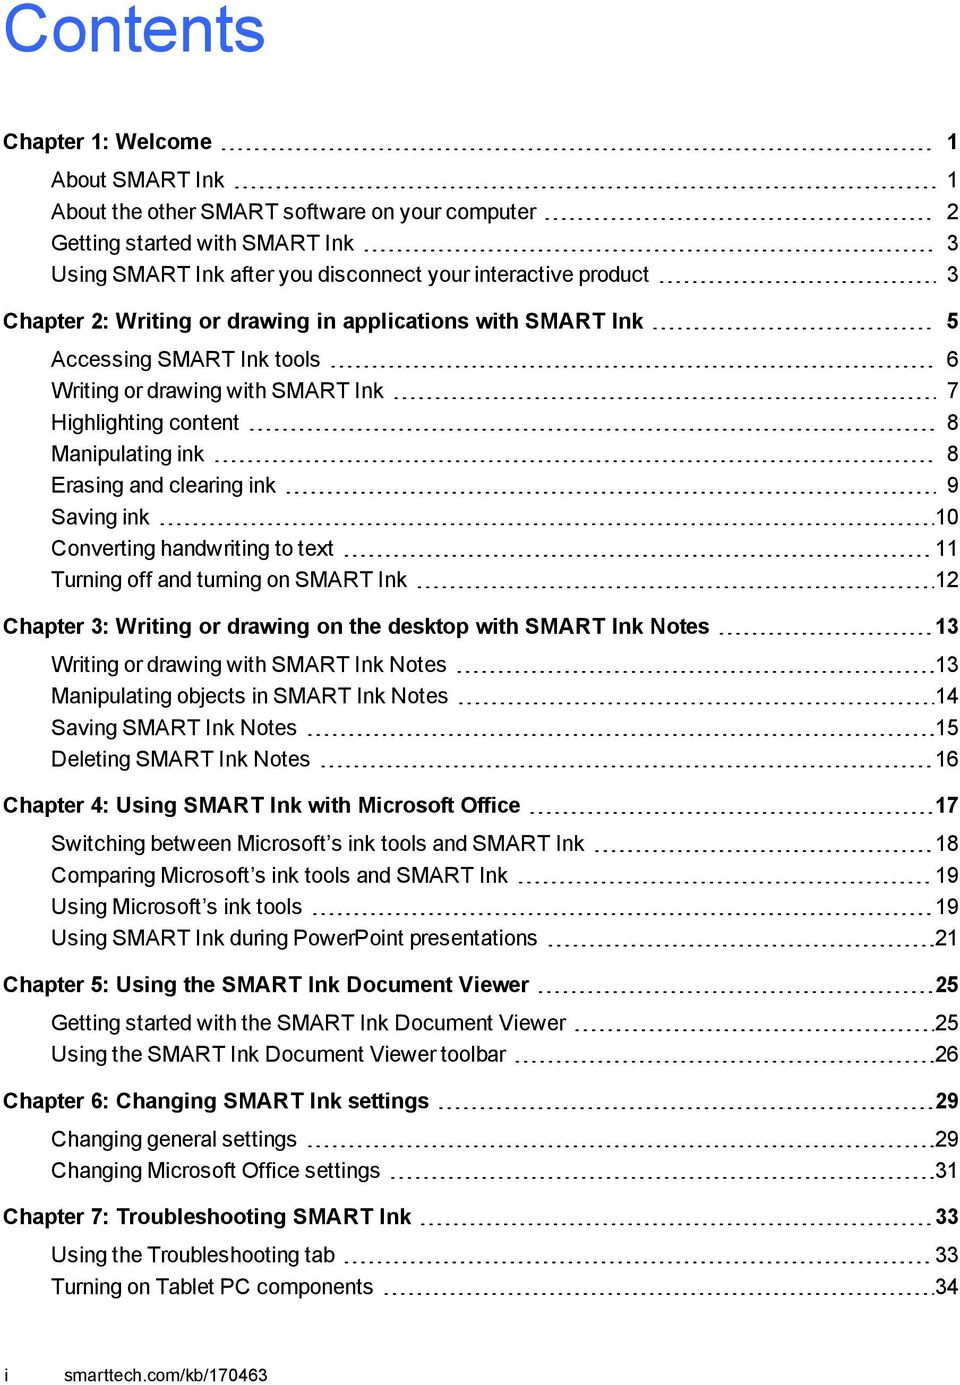 Saving ink 10 Converting handwriting to text 11 Turning off and turning on SMART Ink 12 Chapter 3: Writing or drawing on the desktop with SMART Ink Notes 13 Writing or drawing with SMART Ink Notes 13